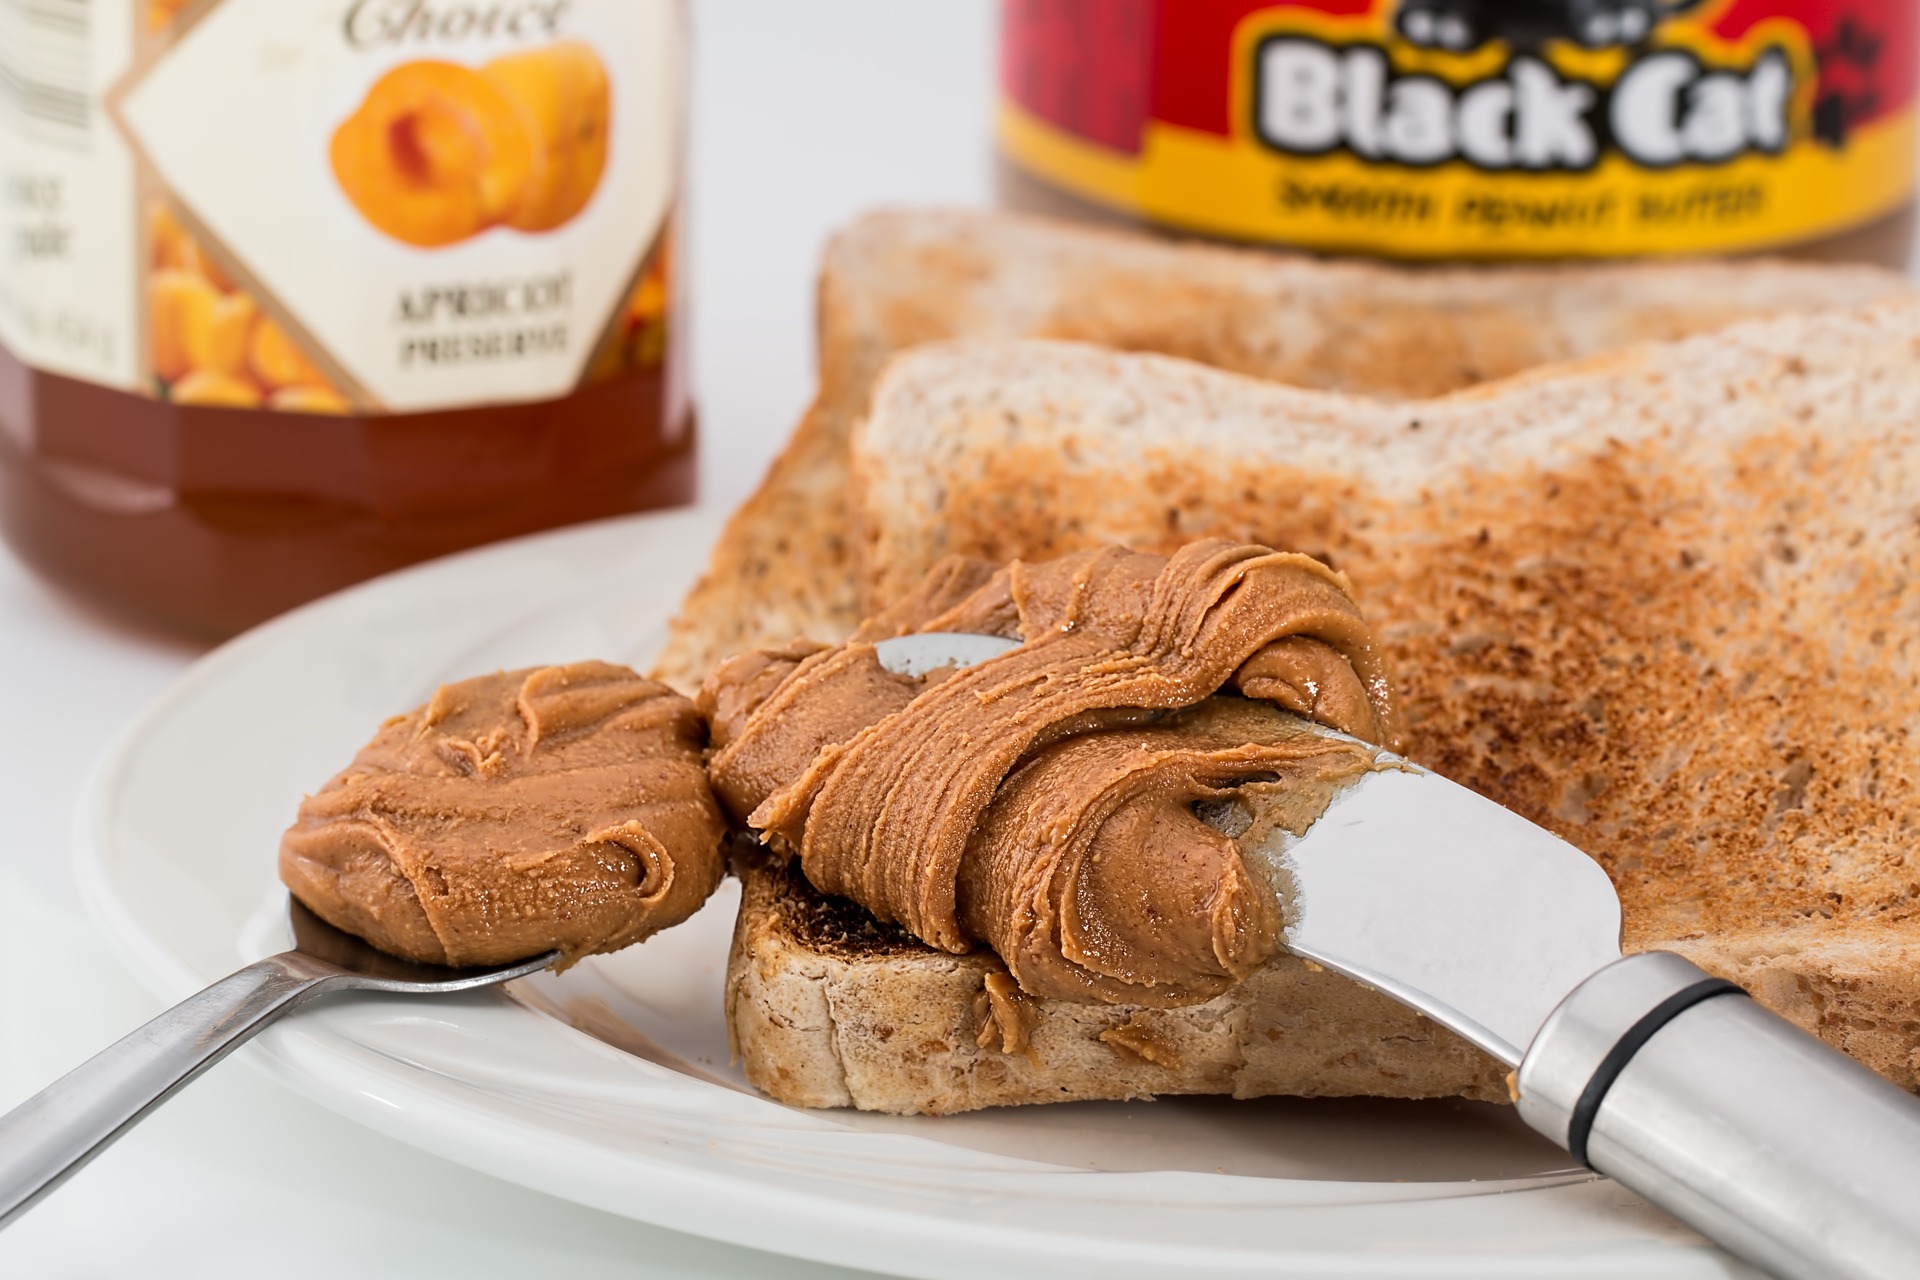 What’s in a Peanut Butter and Jelly Sandwich? Far More Than You’d Think